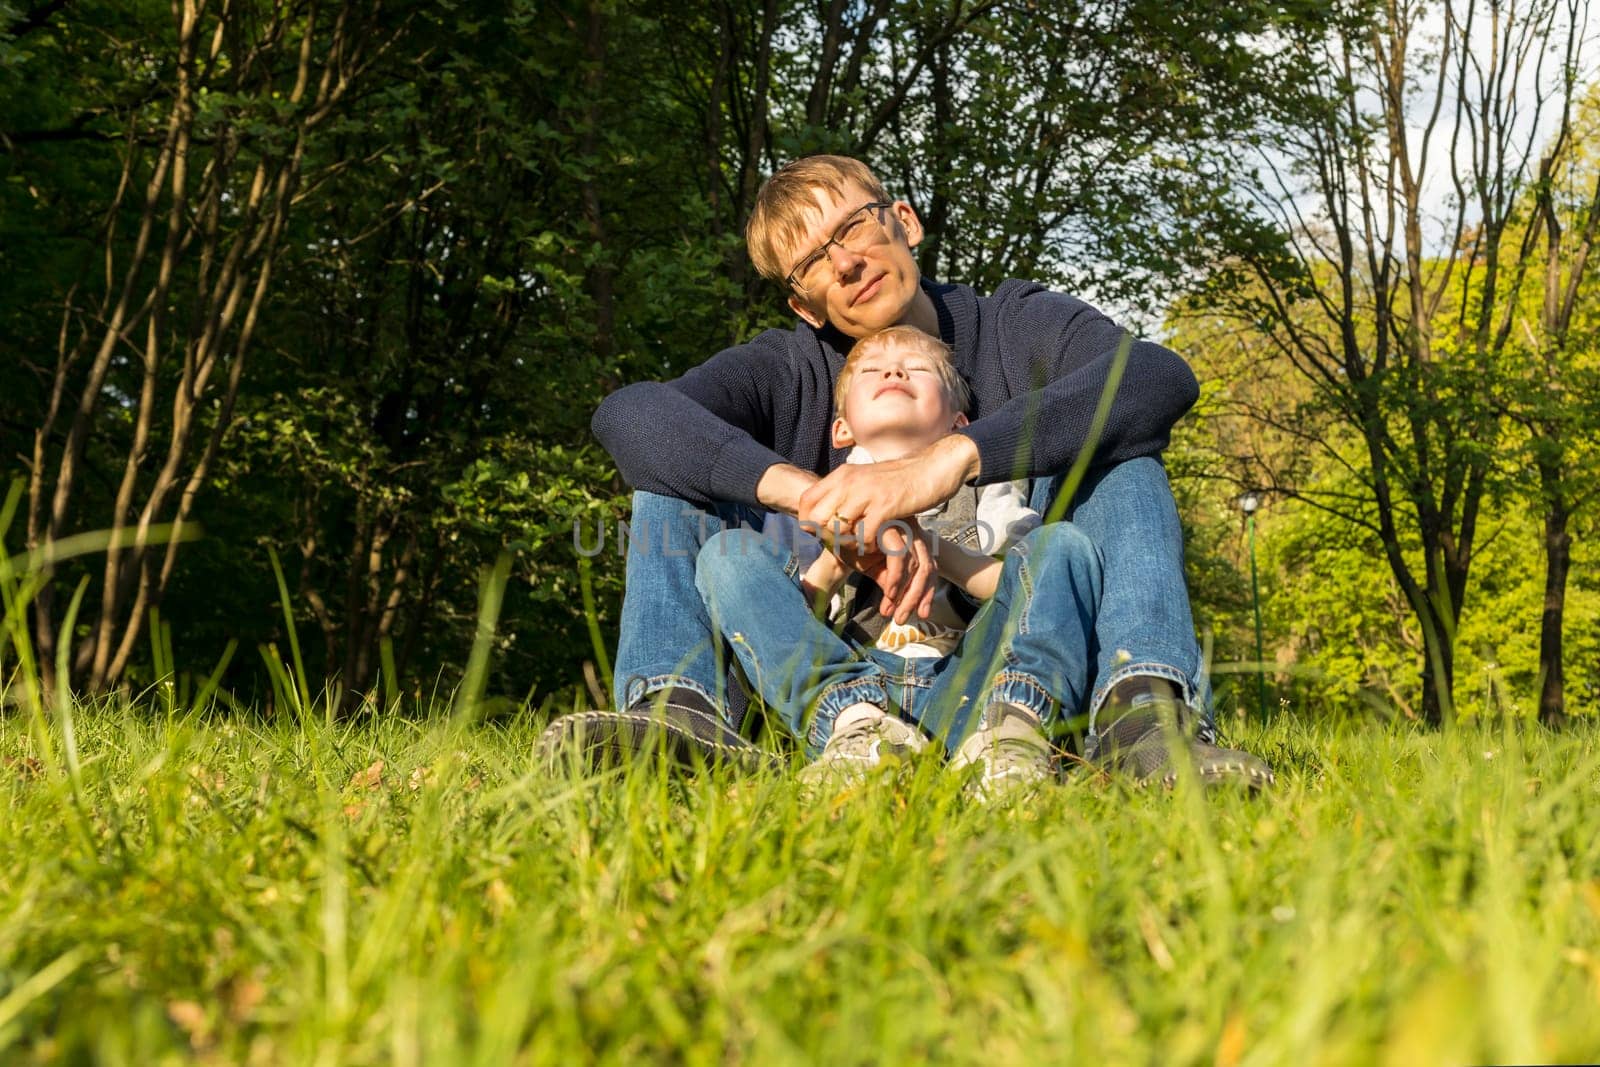 Father And Child, Son Sitting On Grass In Park, Enjoying Time Together. Summer Time. Happy Parenthood, Family Leisure Time, Father's Day. Emotional Connection, Love And Care. Horizontal Plane.